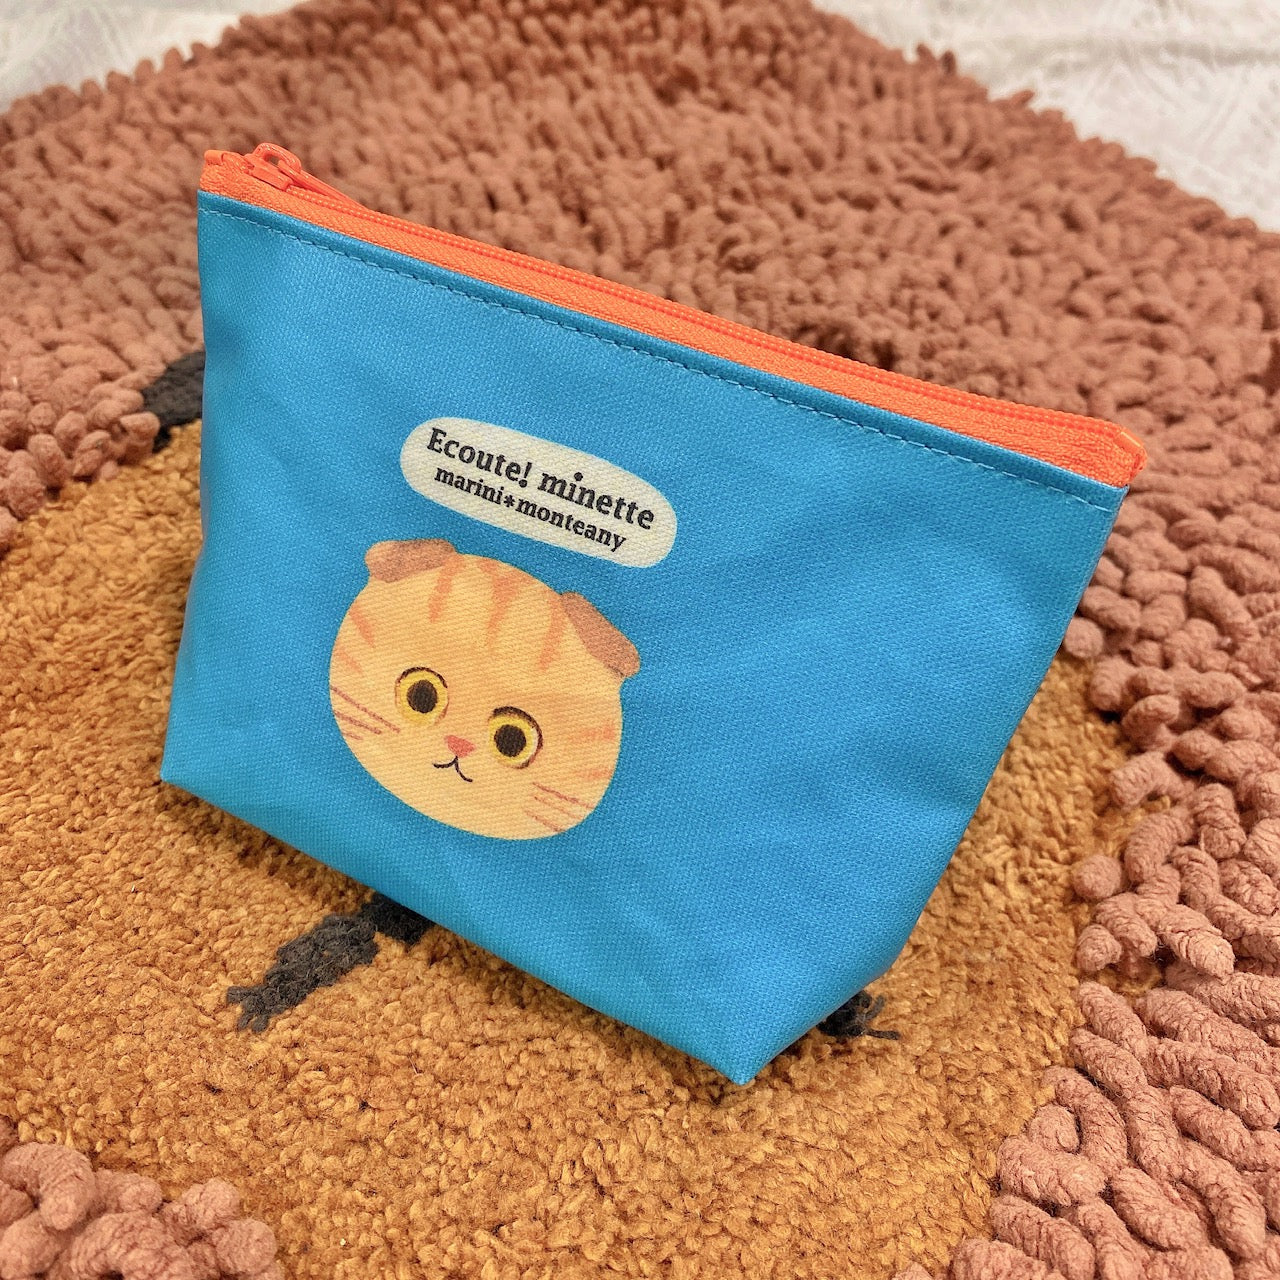 ECOUTE! minette Meow Pouch